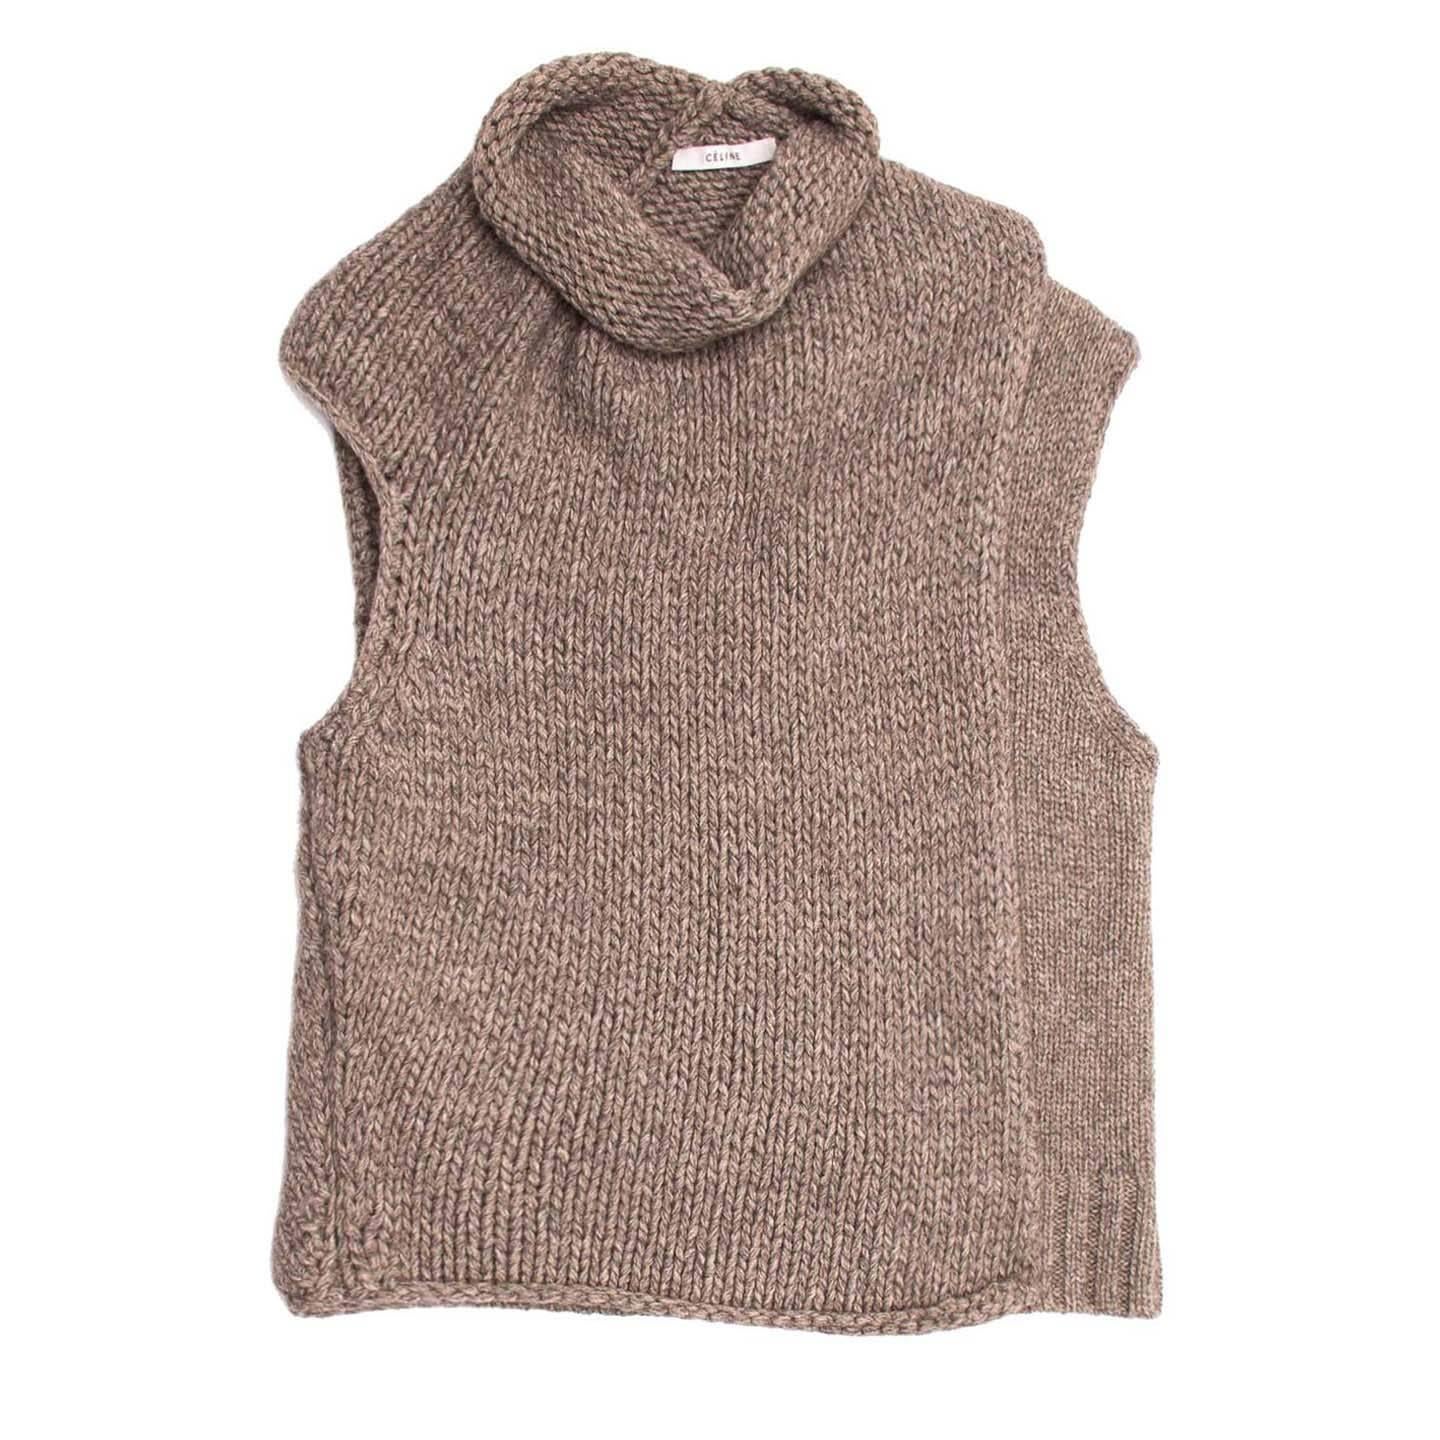 Melange of warm grey and sand sleeveless roll neck chunky knit with wrap overlay at front. Mix of warm wool and yak yarn.

Size  S Universal sizing

Condition  Excellent: never worn with tags